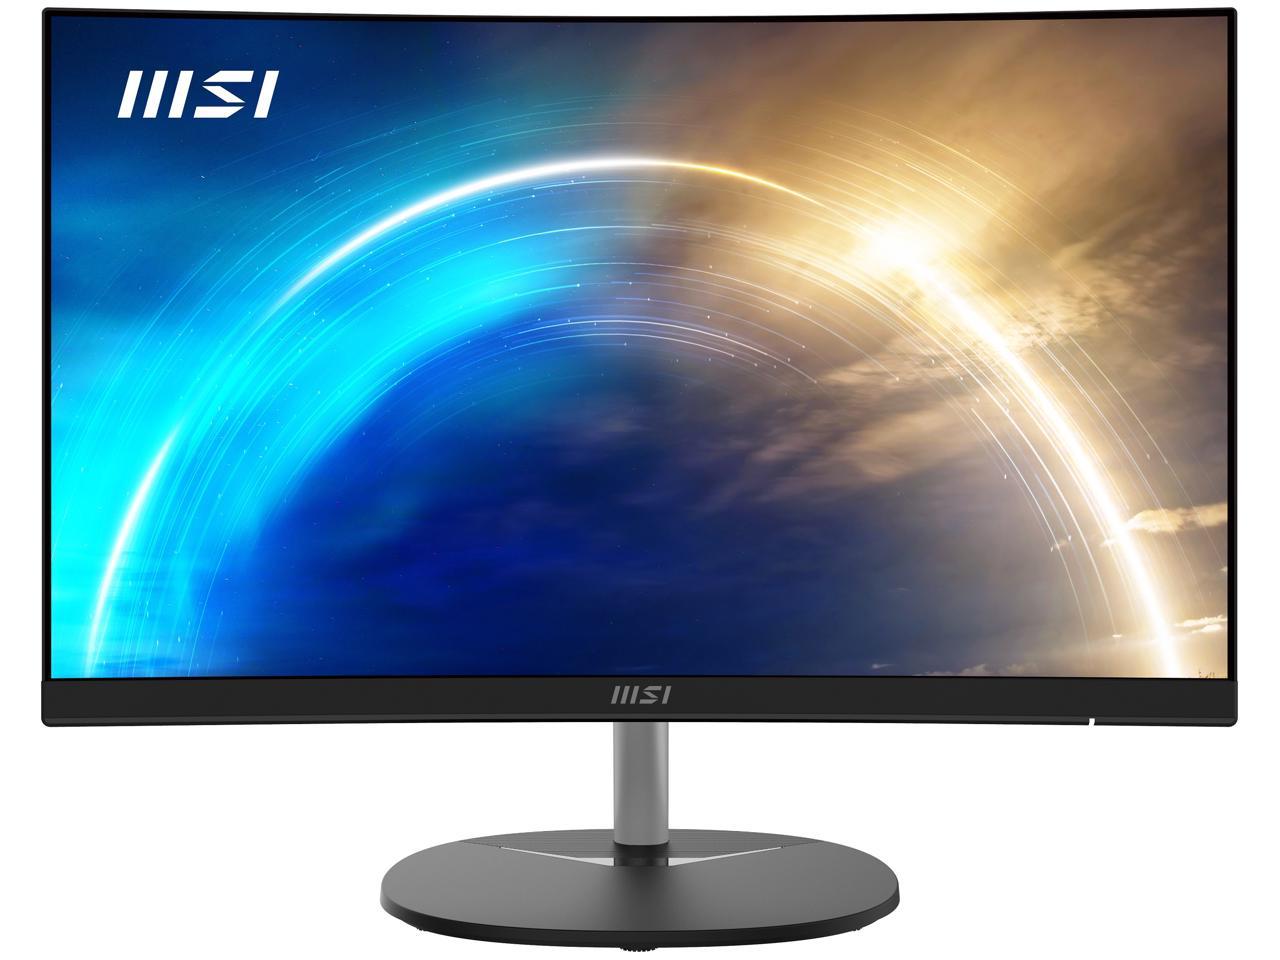 MSI 24" (23.6" viewable) 75 Hz VA FHD Business & Productivity Monitor 1ms (MPRT) / 4ms (GTG) 1920 x 1080 Curved MP241CA - image 2 of 10